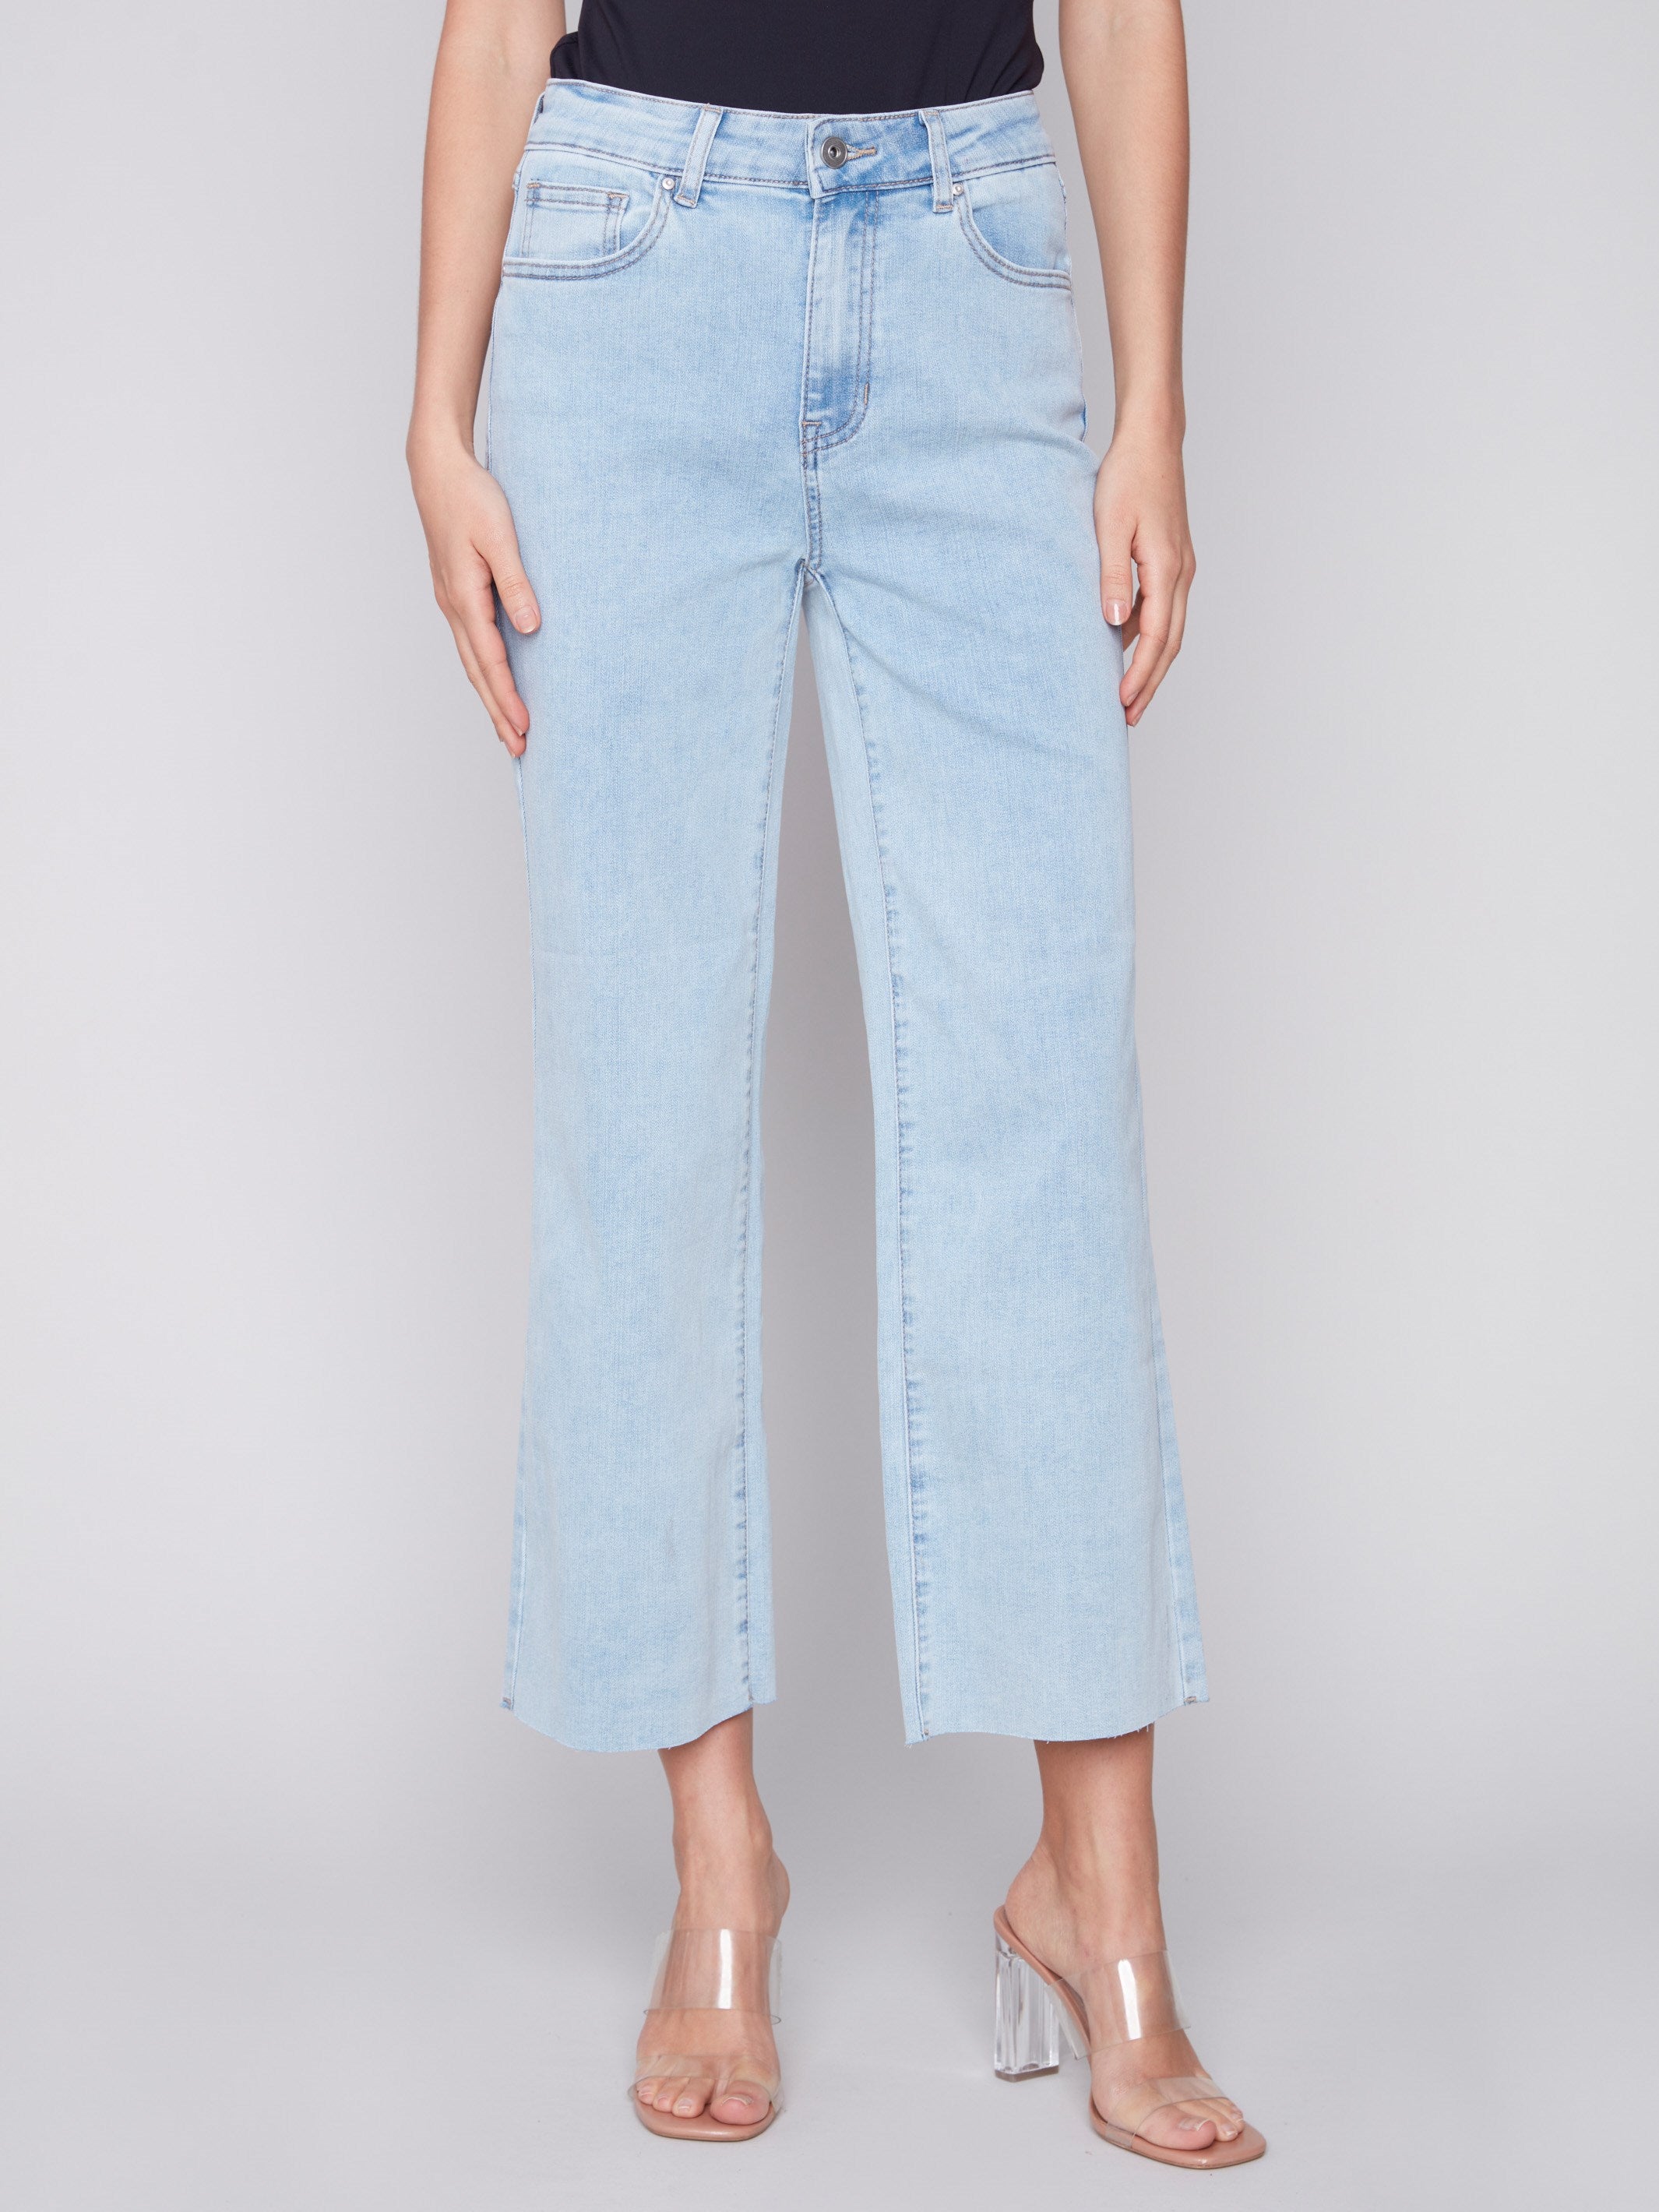 Flared Jeans with Raw Edge - Bleach Blue - Charlie B Collection Canada - Image 2